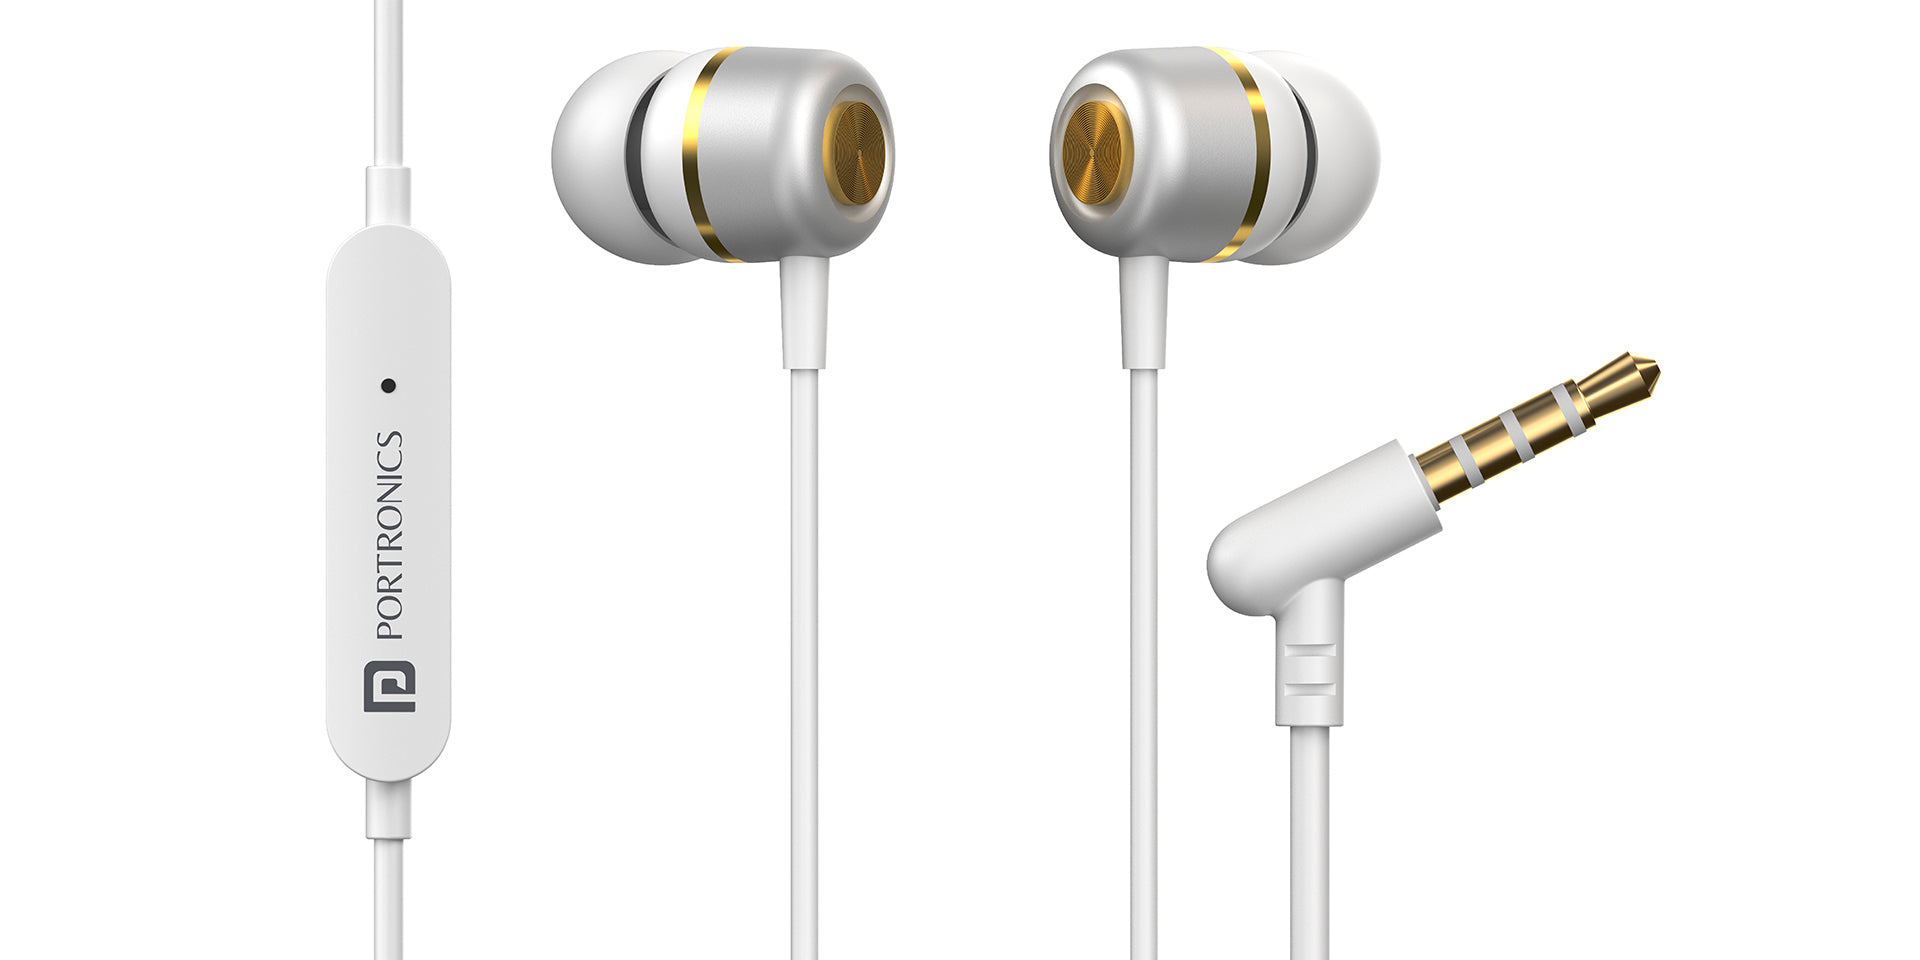 conch 10 wired earphone| headphone wired